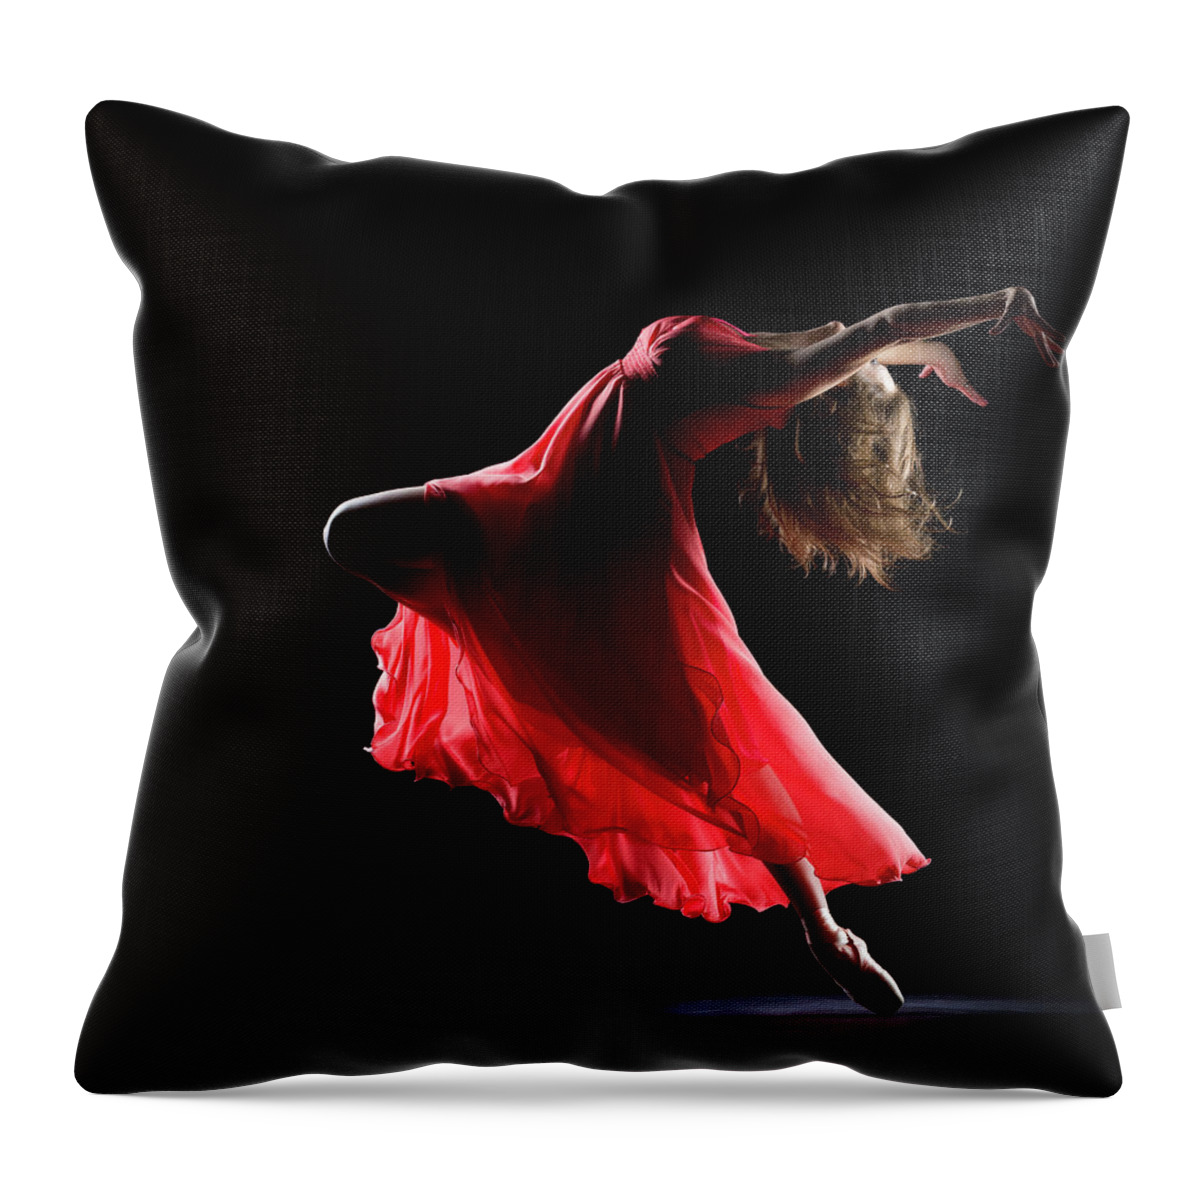 Ballet Dancer Throw Pillow featuring the photograph The Dancer On Black Background by Proxyminder